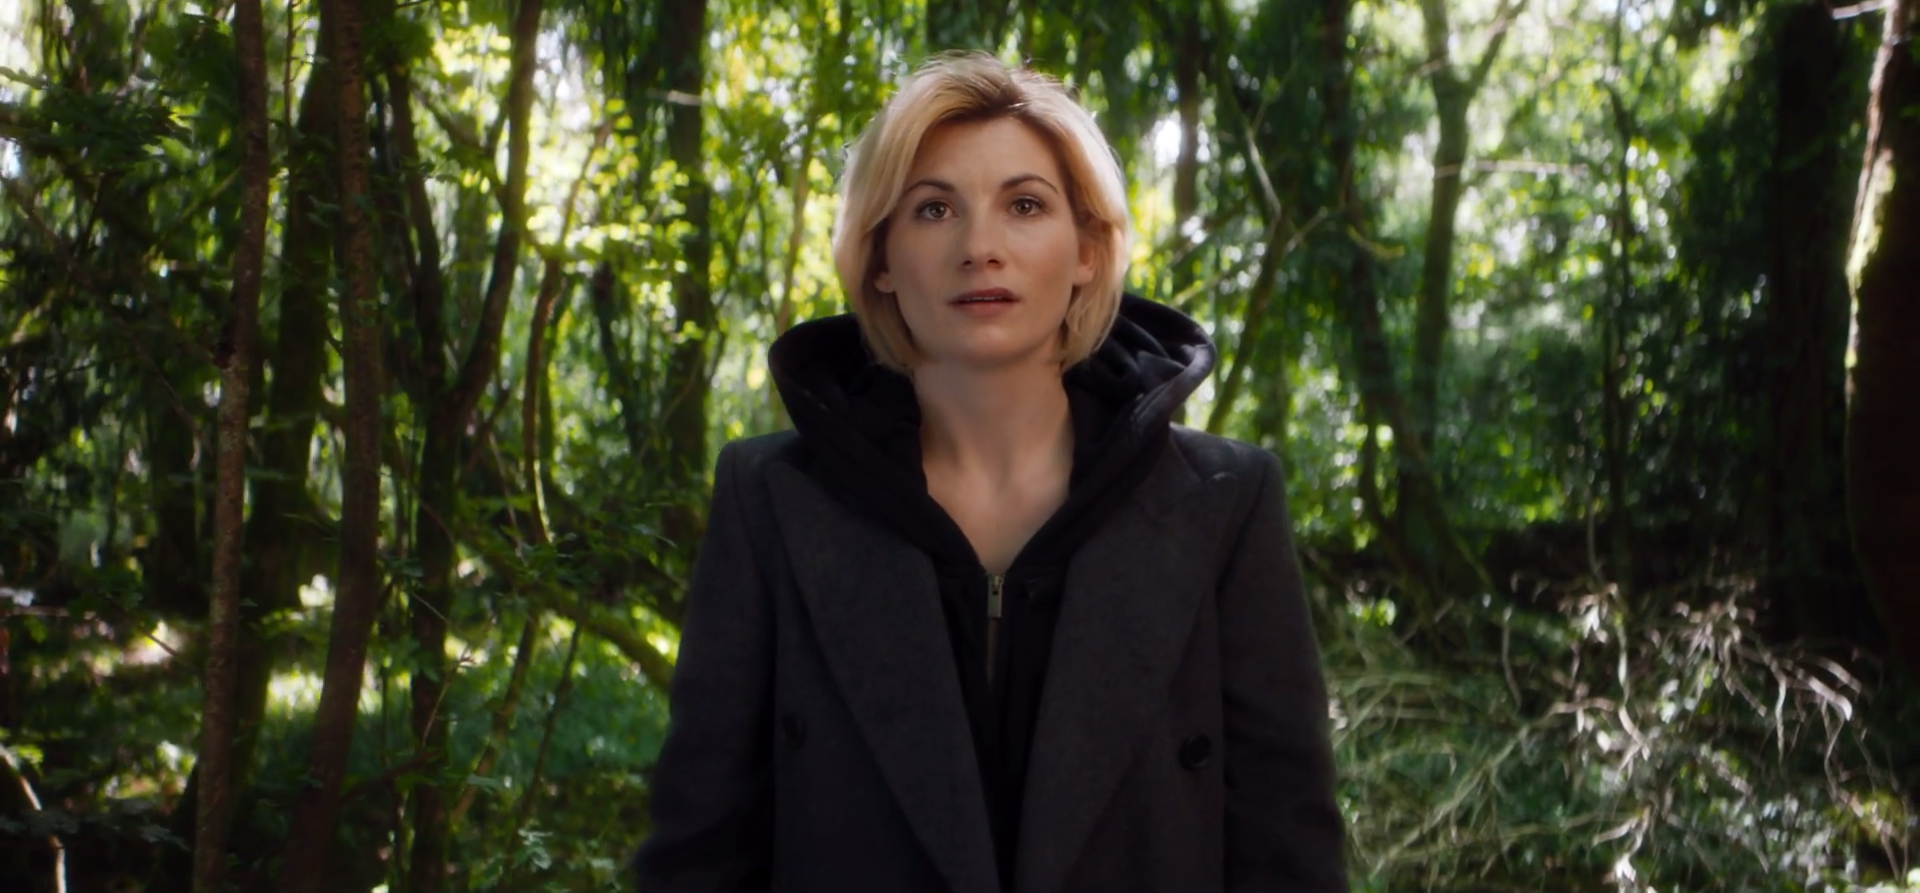 The New Doctor Who Is Jodie Whittaker